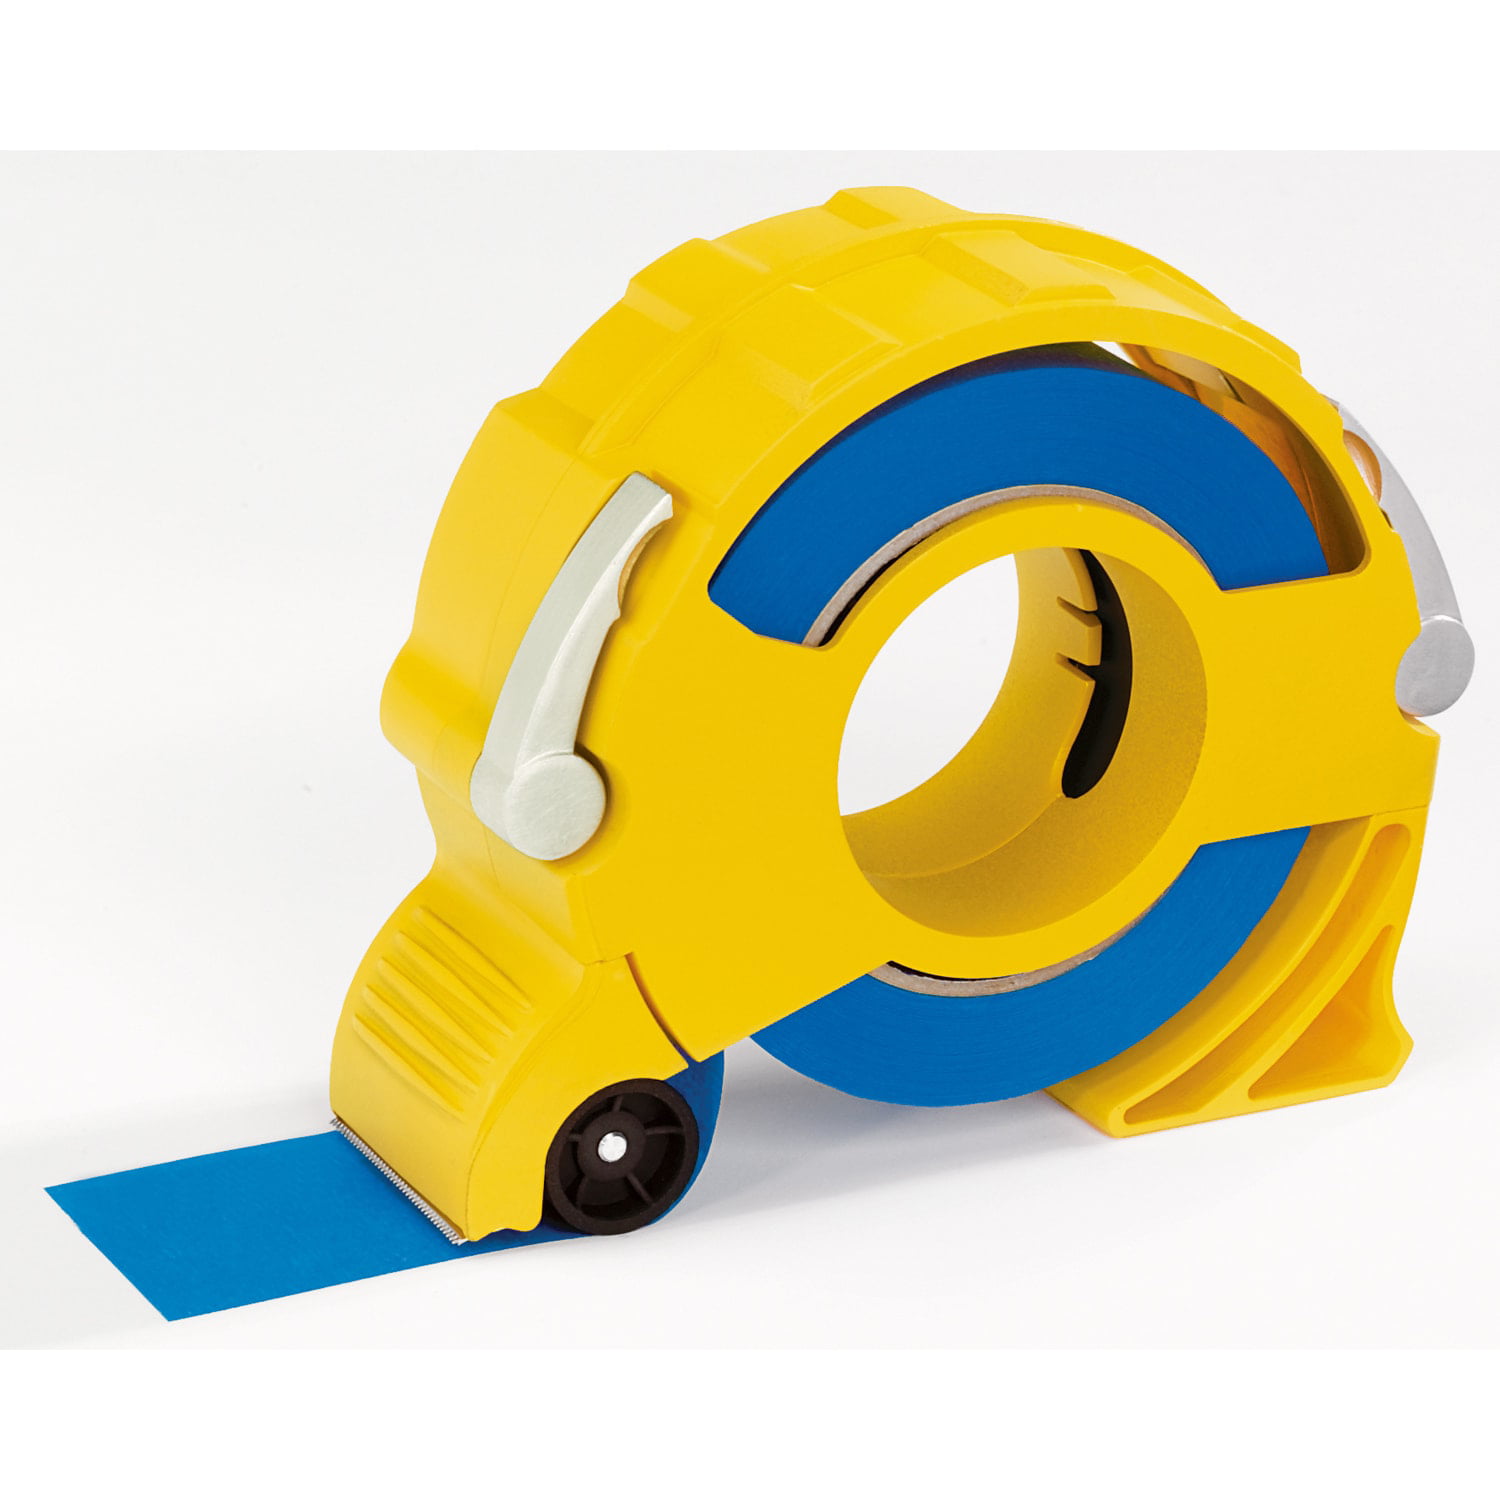 Walk Behind Tape Dispenser - Quick And Easy Tape Applicator